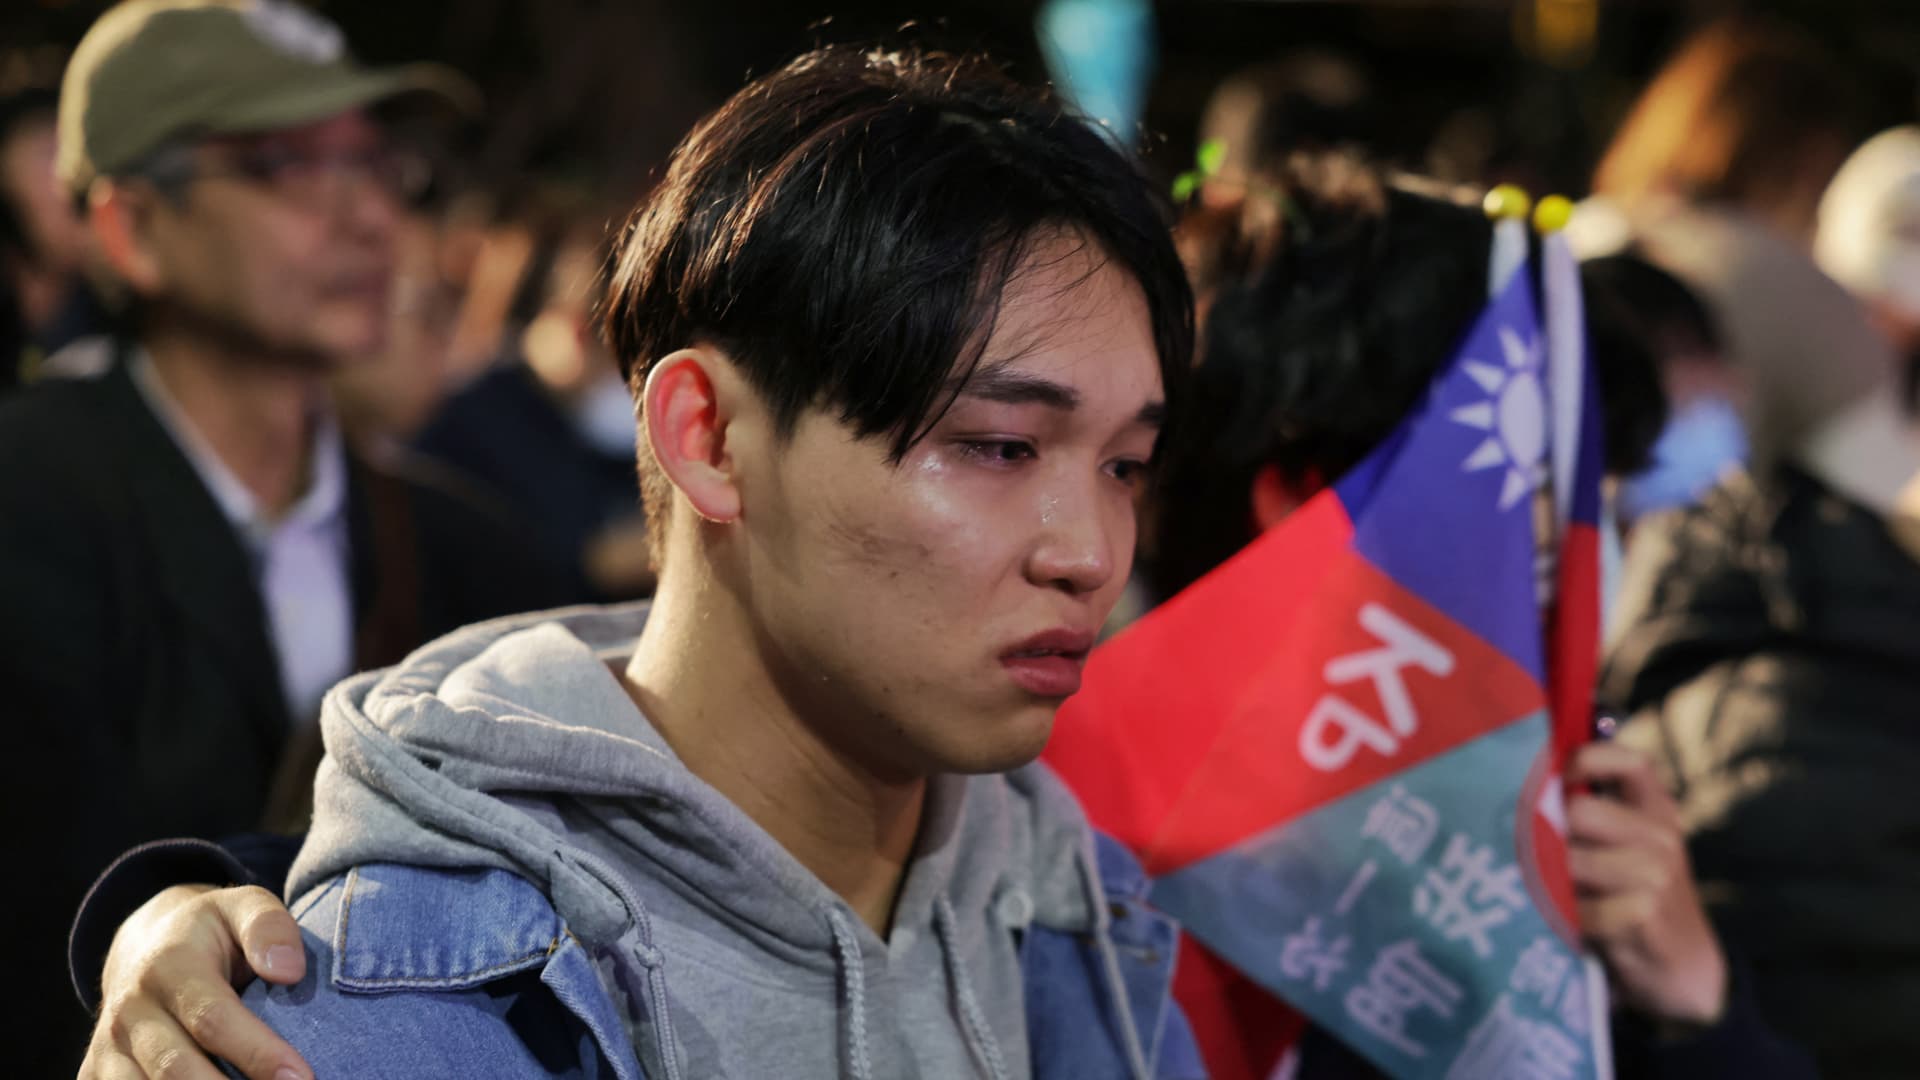 Supporters of Taiwan People's Party (TPP) presidential candidate Ko Wen-je react as they wait for results in the presidential election at the TPP headquarters in Xinzhuang in New Taipei City on January 13, 2024. (Photo by I-Hwa CHENG / AFP) (Photo by I-HWA CHENG/AFP via Getty Images)